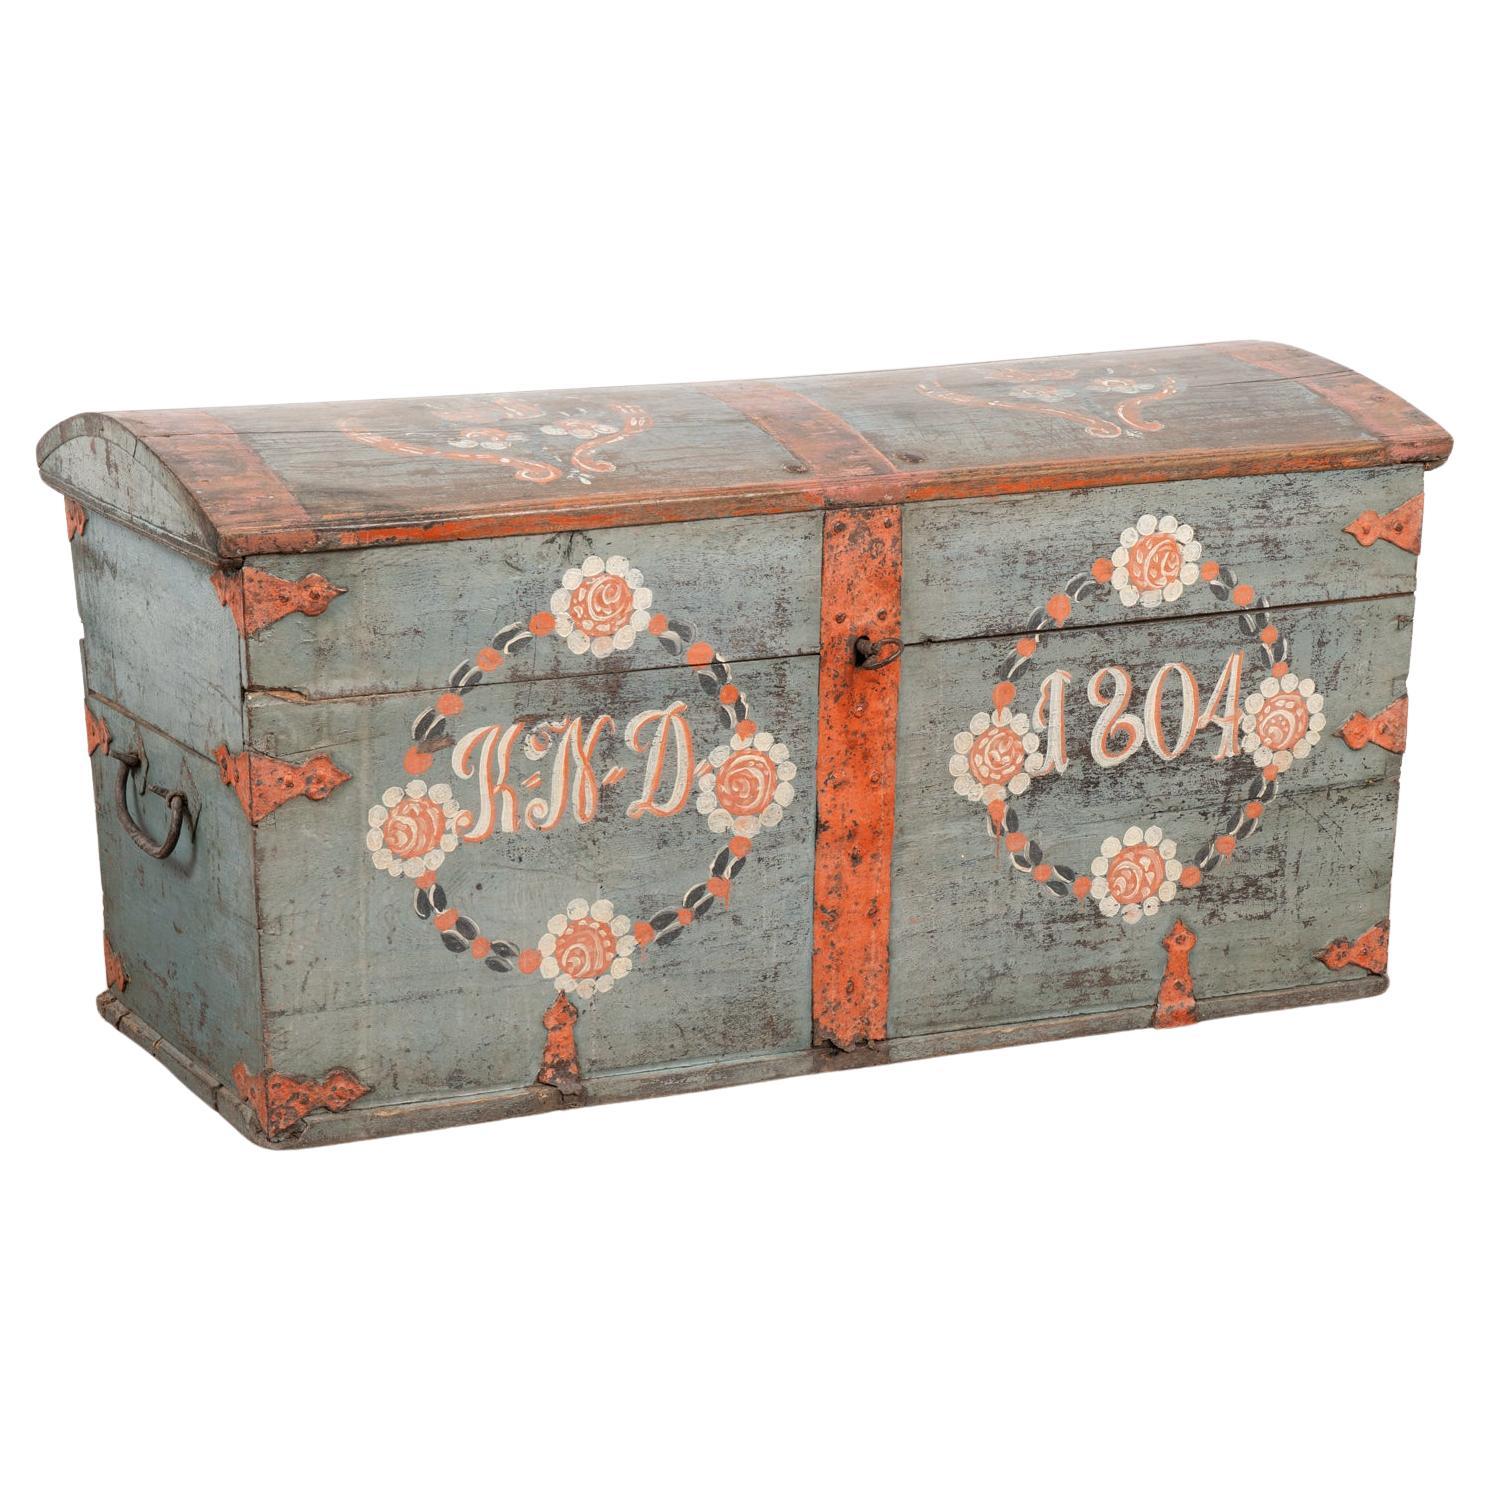 Original Blue Painted Dome Top Trunk from Sweden dated 1804 For Sale